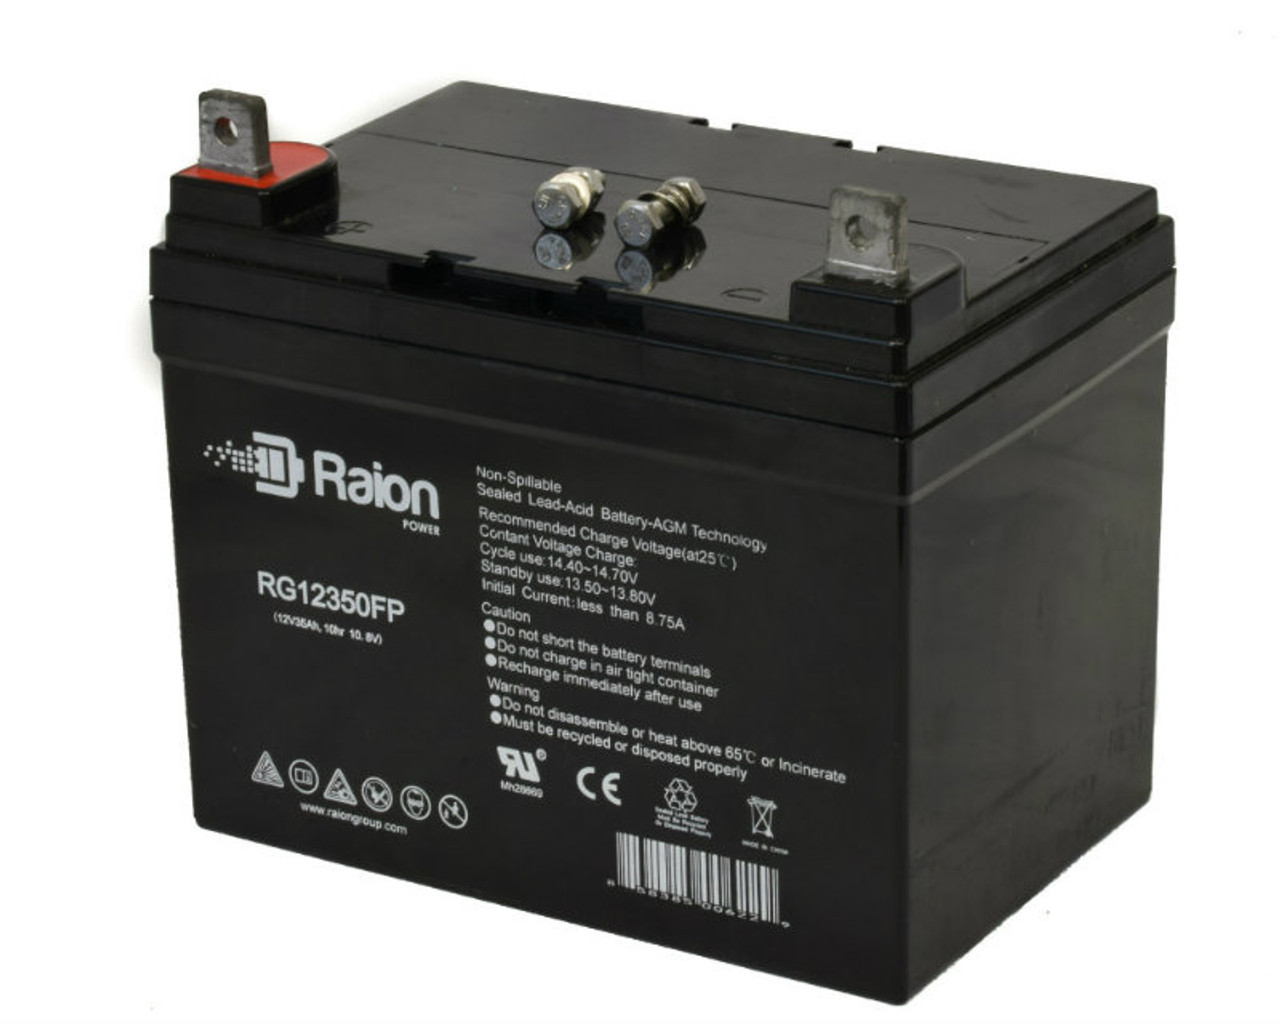 Raion Power Replacement 12V 35Ah RG12350FP Battery for J.I. Case & Case Ih Lawn 110XC